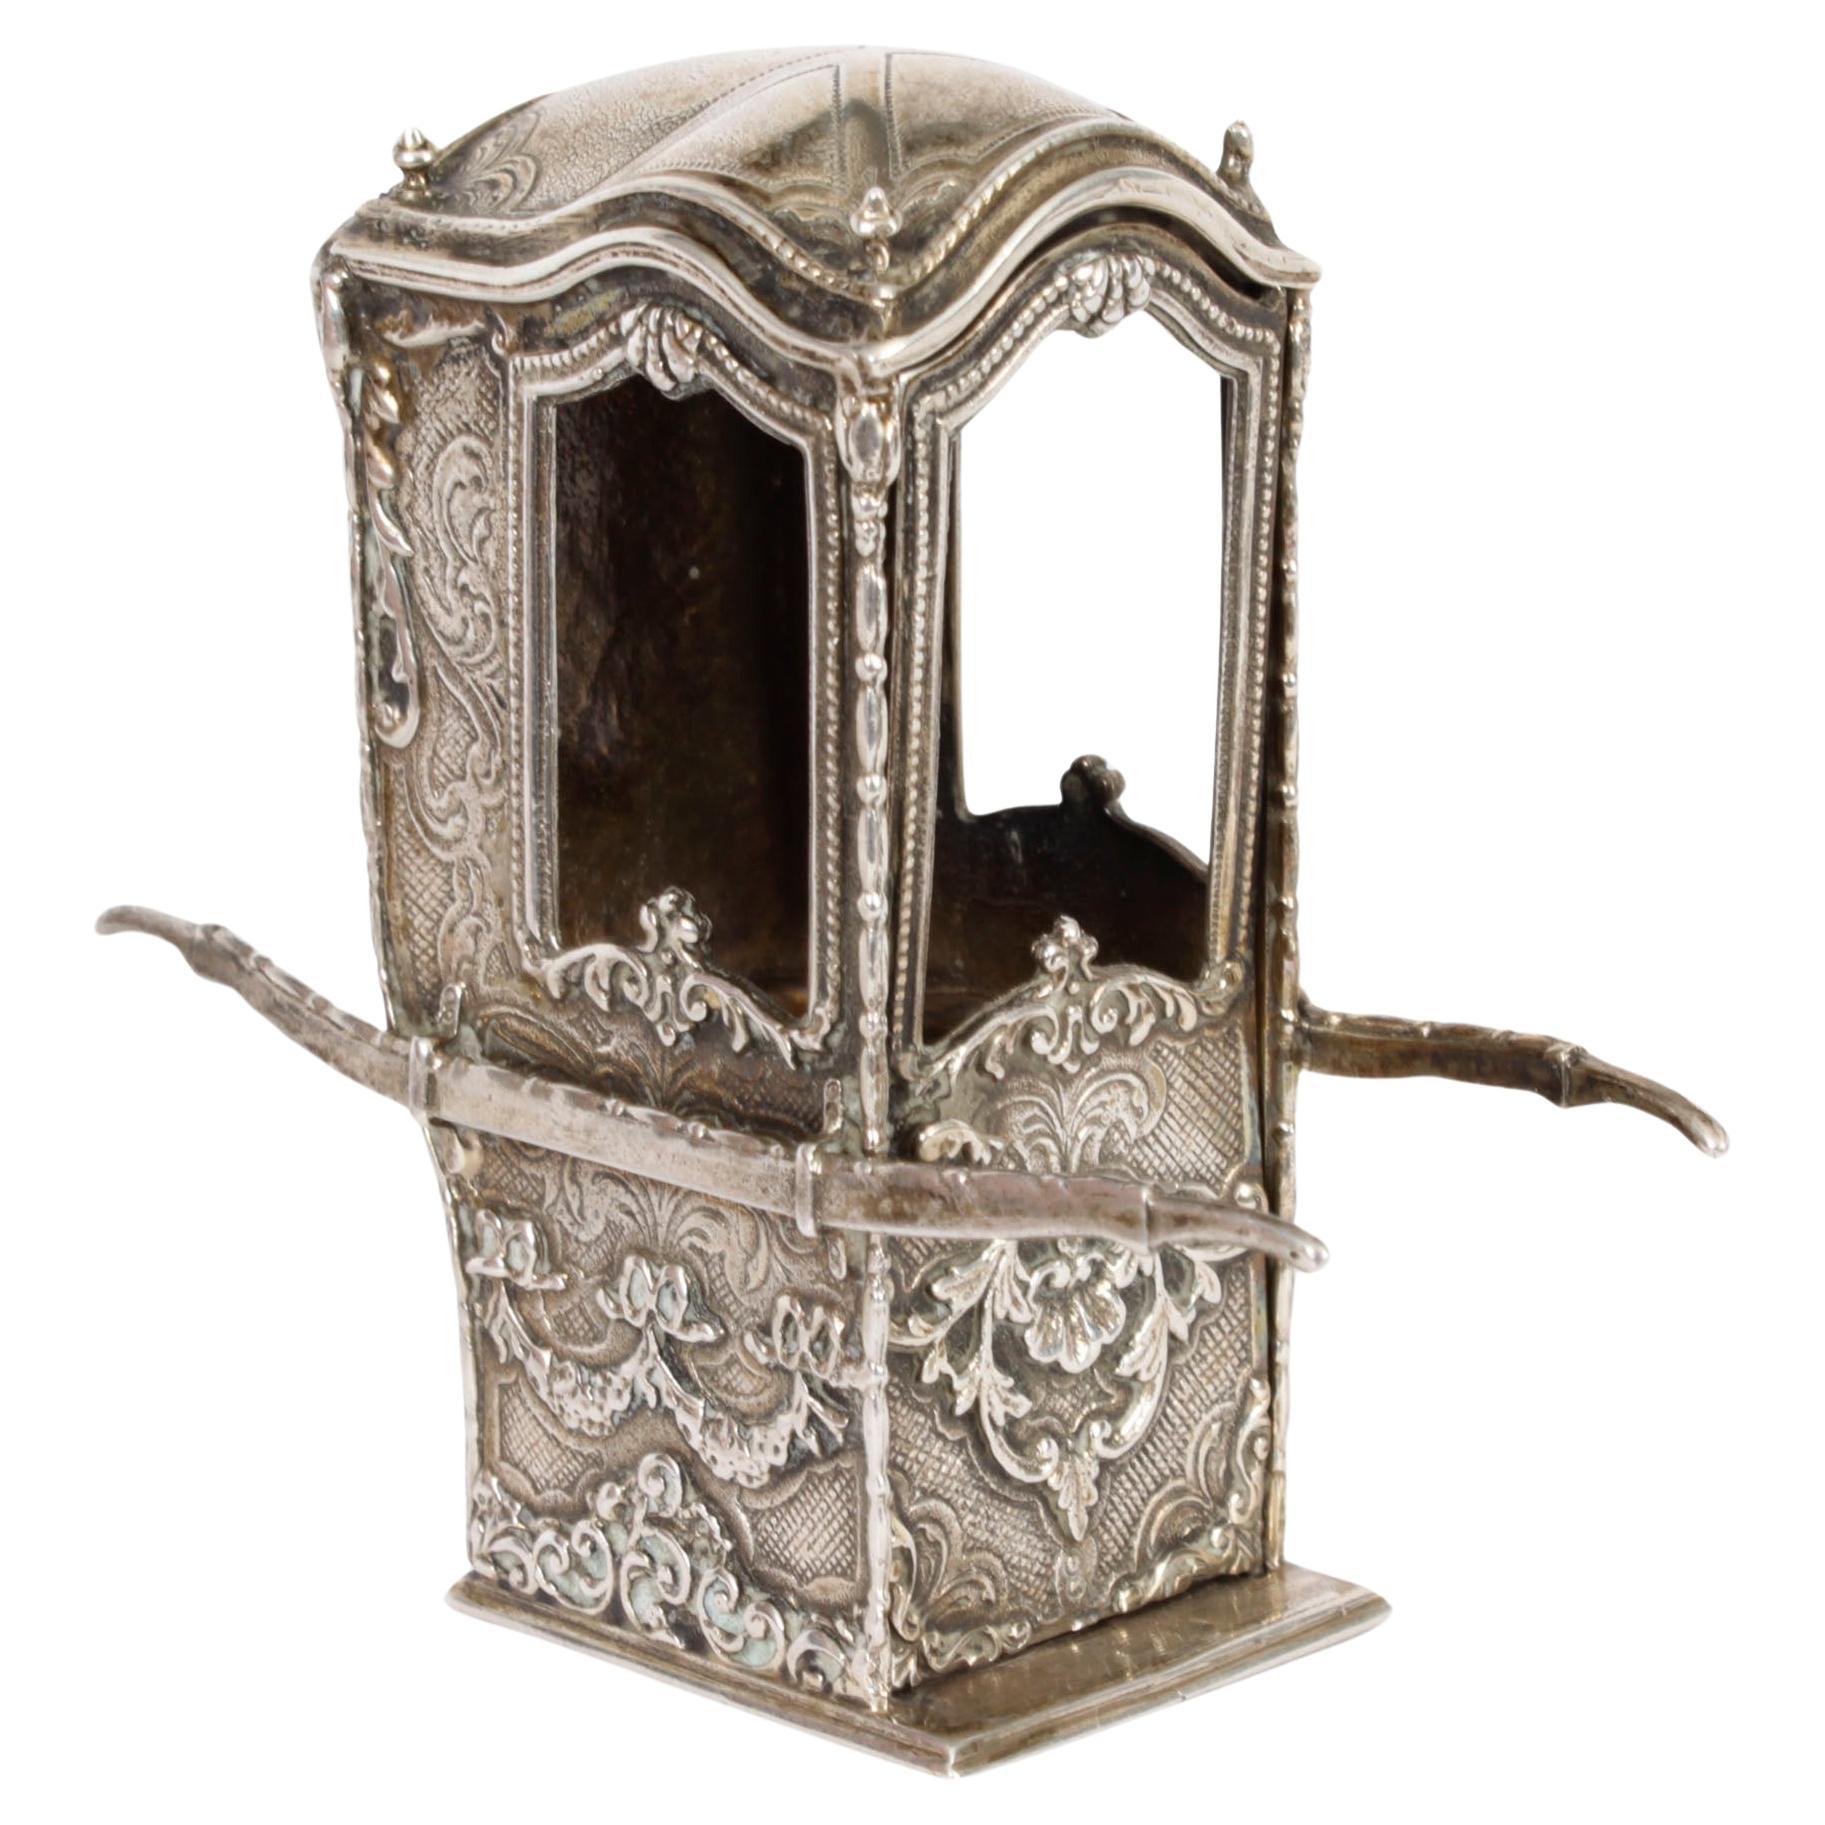 AntiqueFrench Silver Miniature Sedan Chair 19th Century For Sale